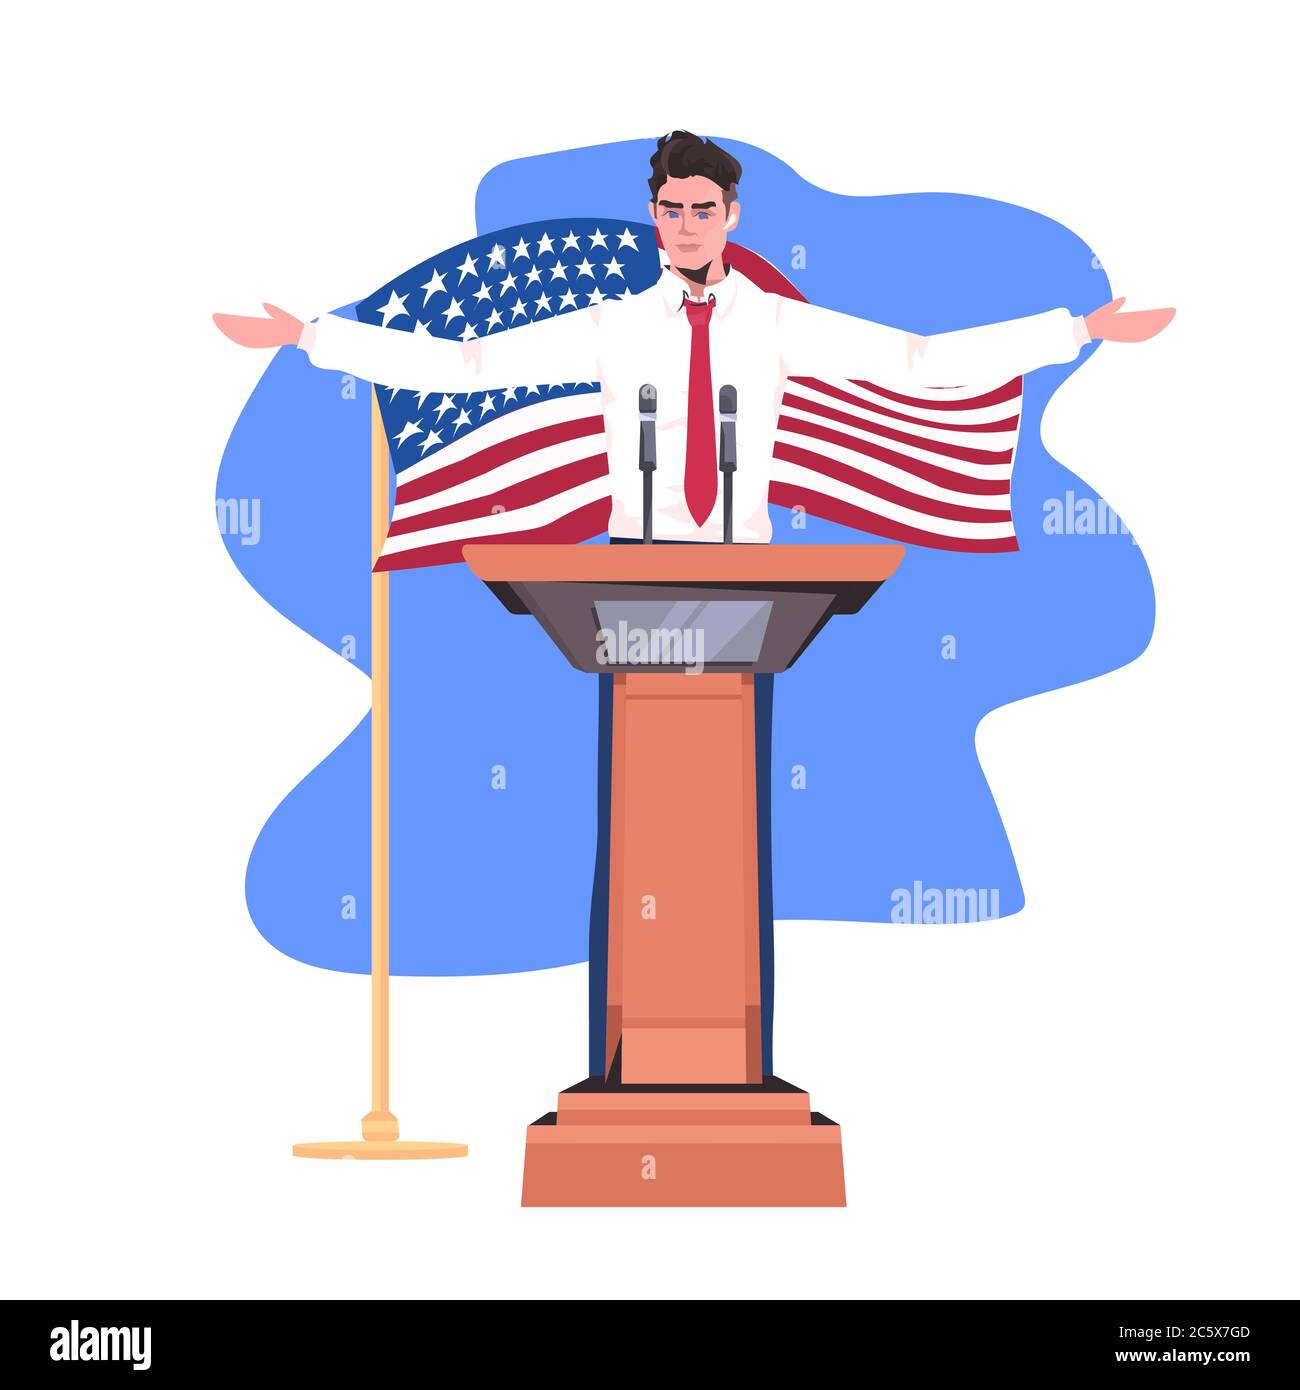 united states politician making speech from tribune with usa flag 4th of july american independence day celebration concept full length vector illustration Stock Vector